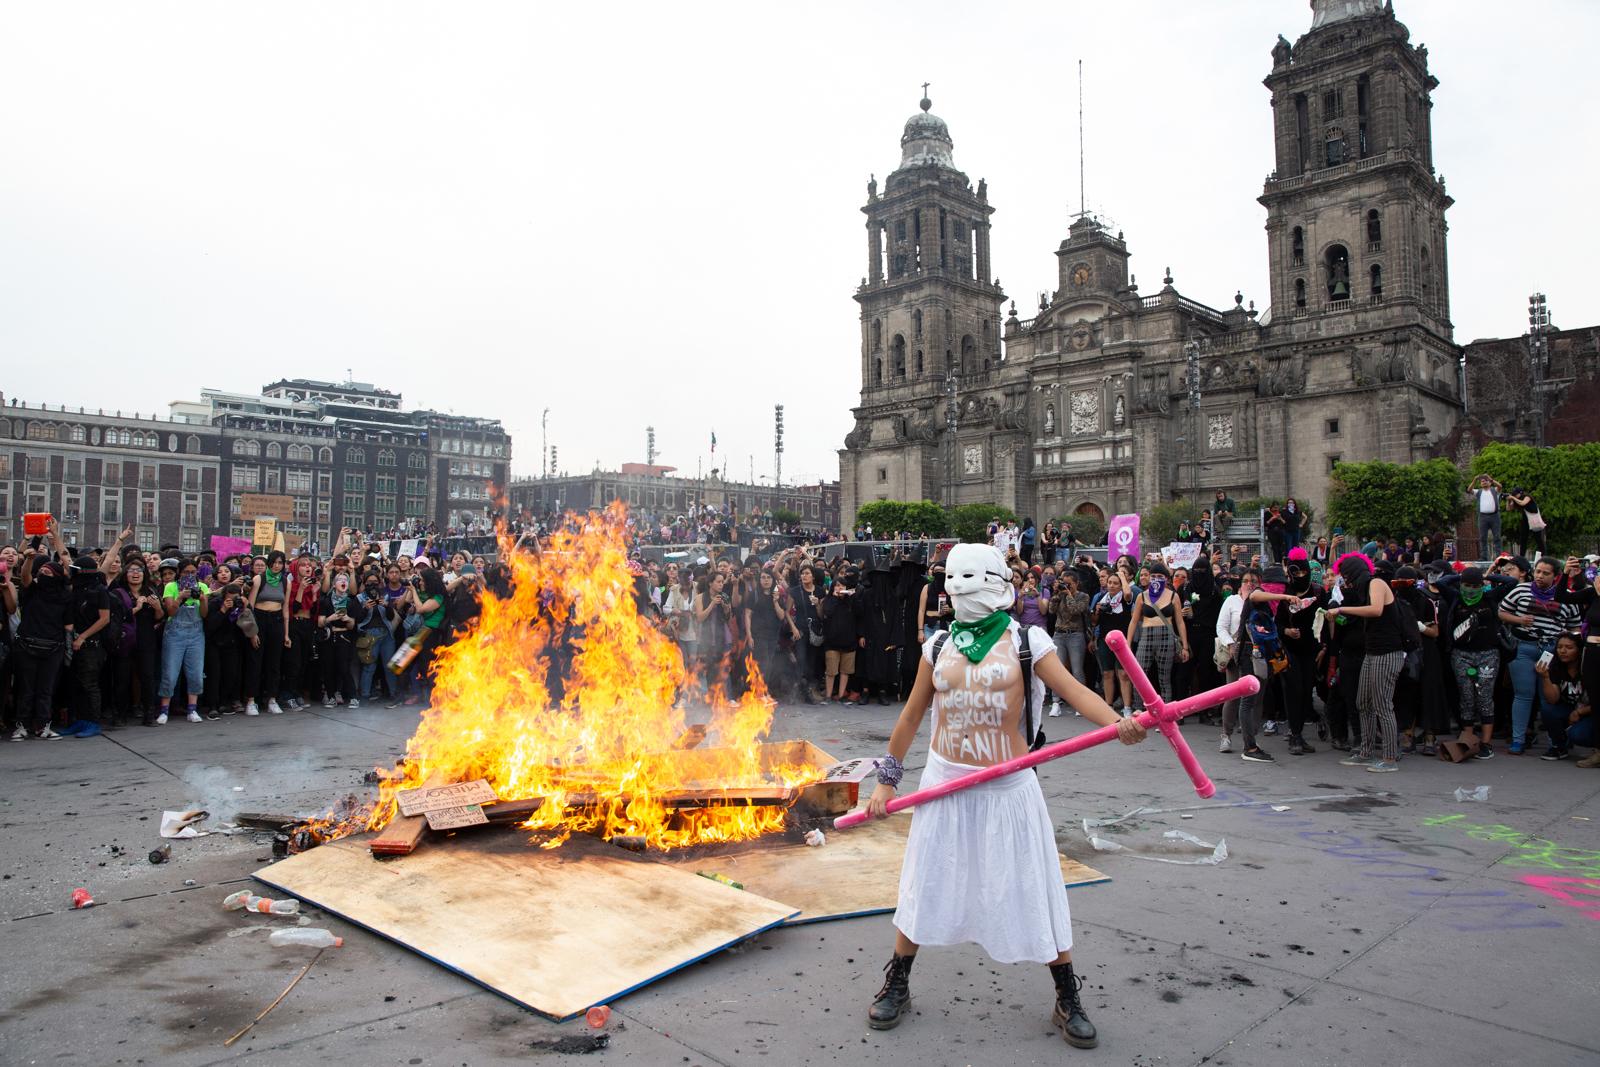 MEXICO Demonstrators circle round a wood pile they set on fire as they rally against gender-based violence and inequality on International Women&rsquo;s Day in Mexico City on March 8, 2020. According to government statistics, at least ten women are murdered every day in Mexico, making it one of the most dangerous countries in the world for girls and women.